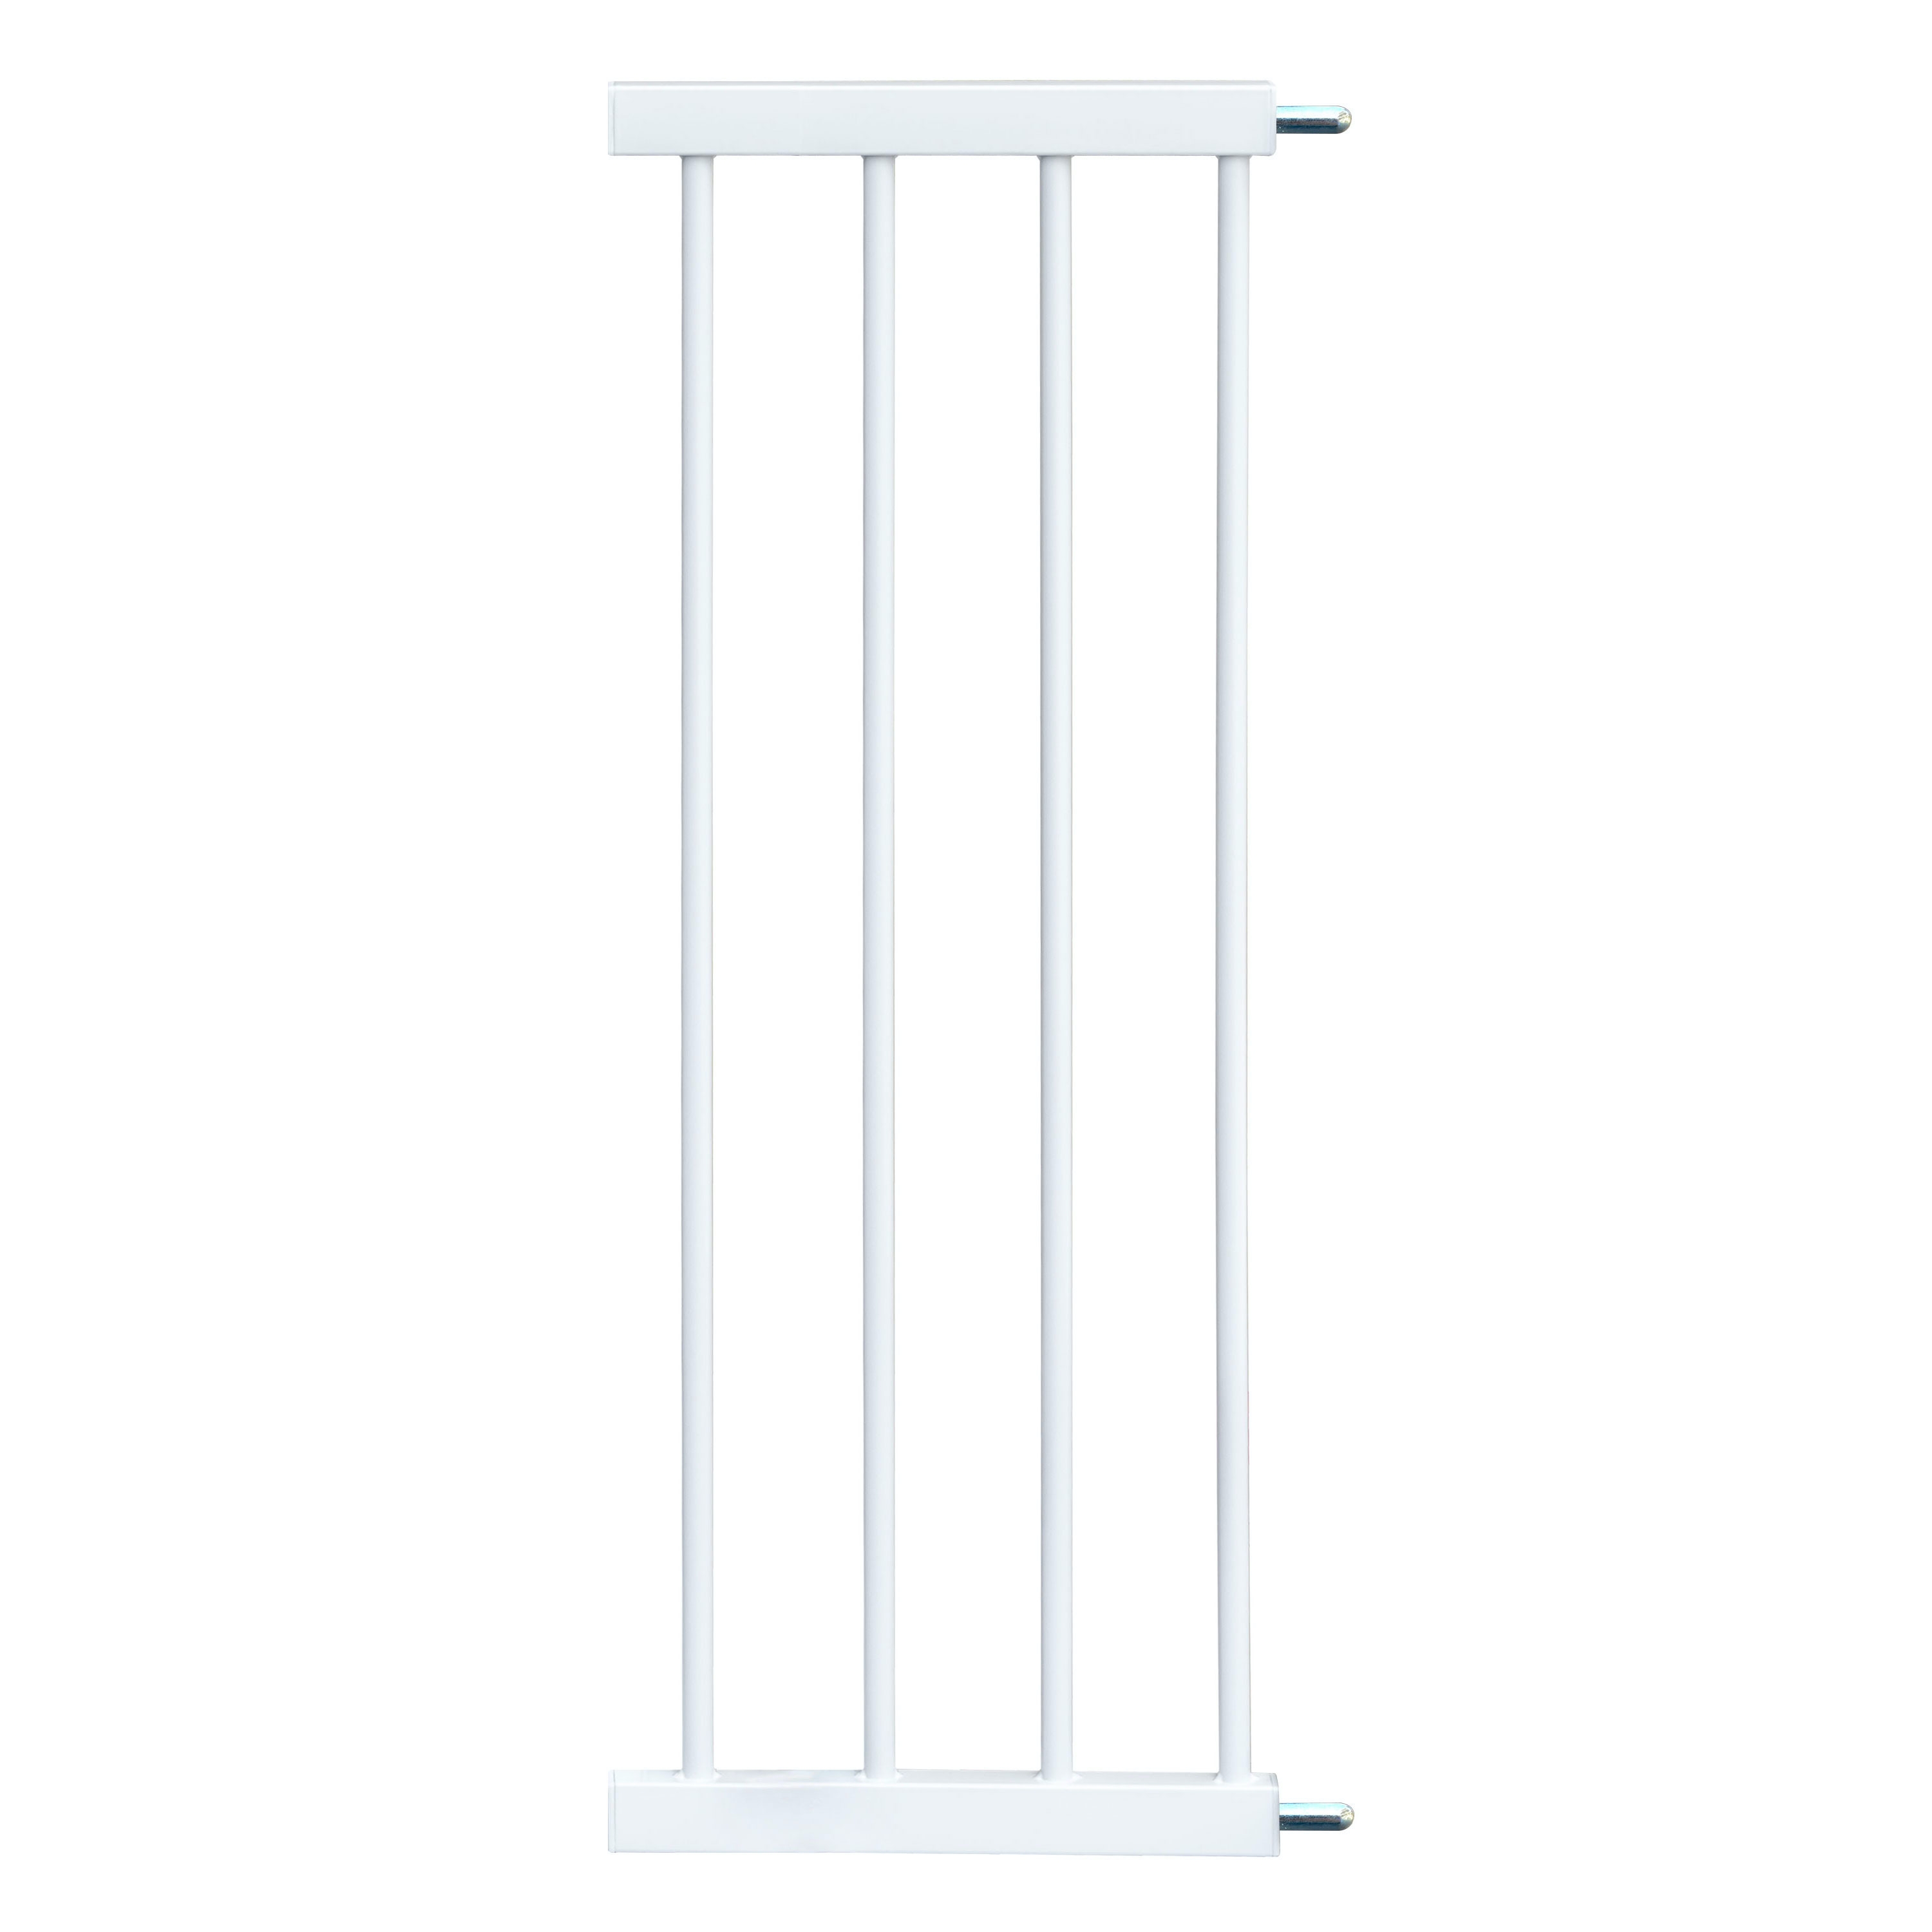 Mothercare | Fisher-Price Barricade Security Gate for Children - Extension Part 30cms.